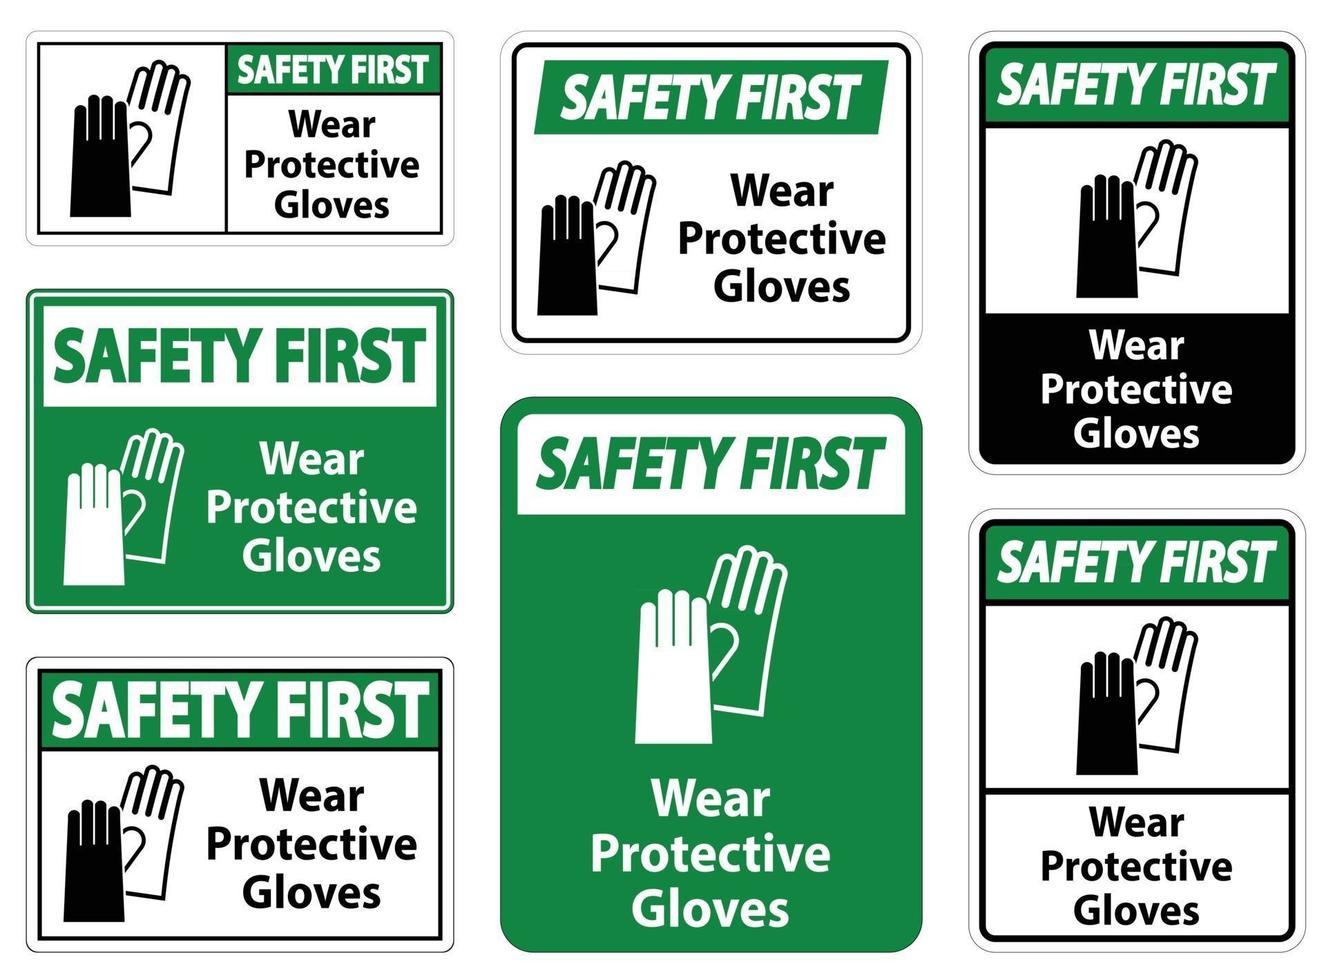 Safety First Wear protective gloves sign on white background vector